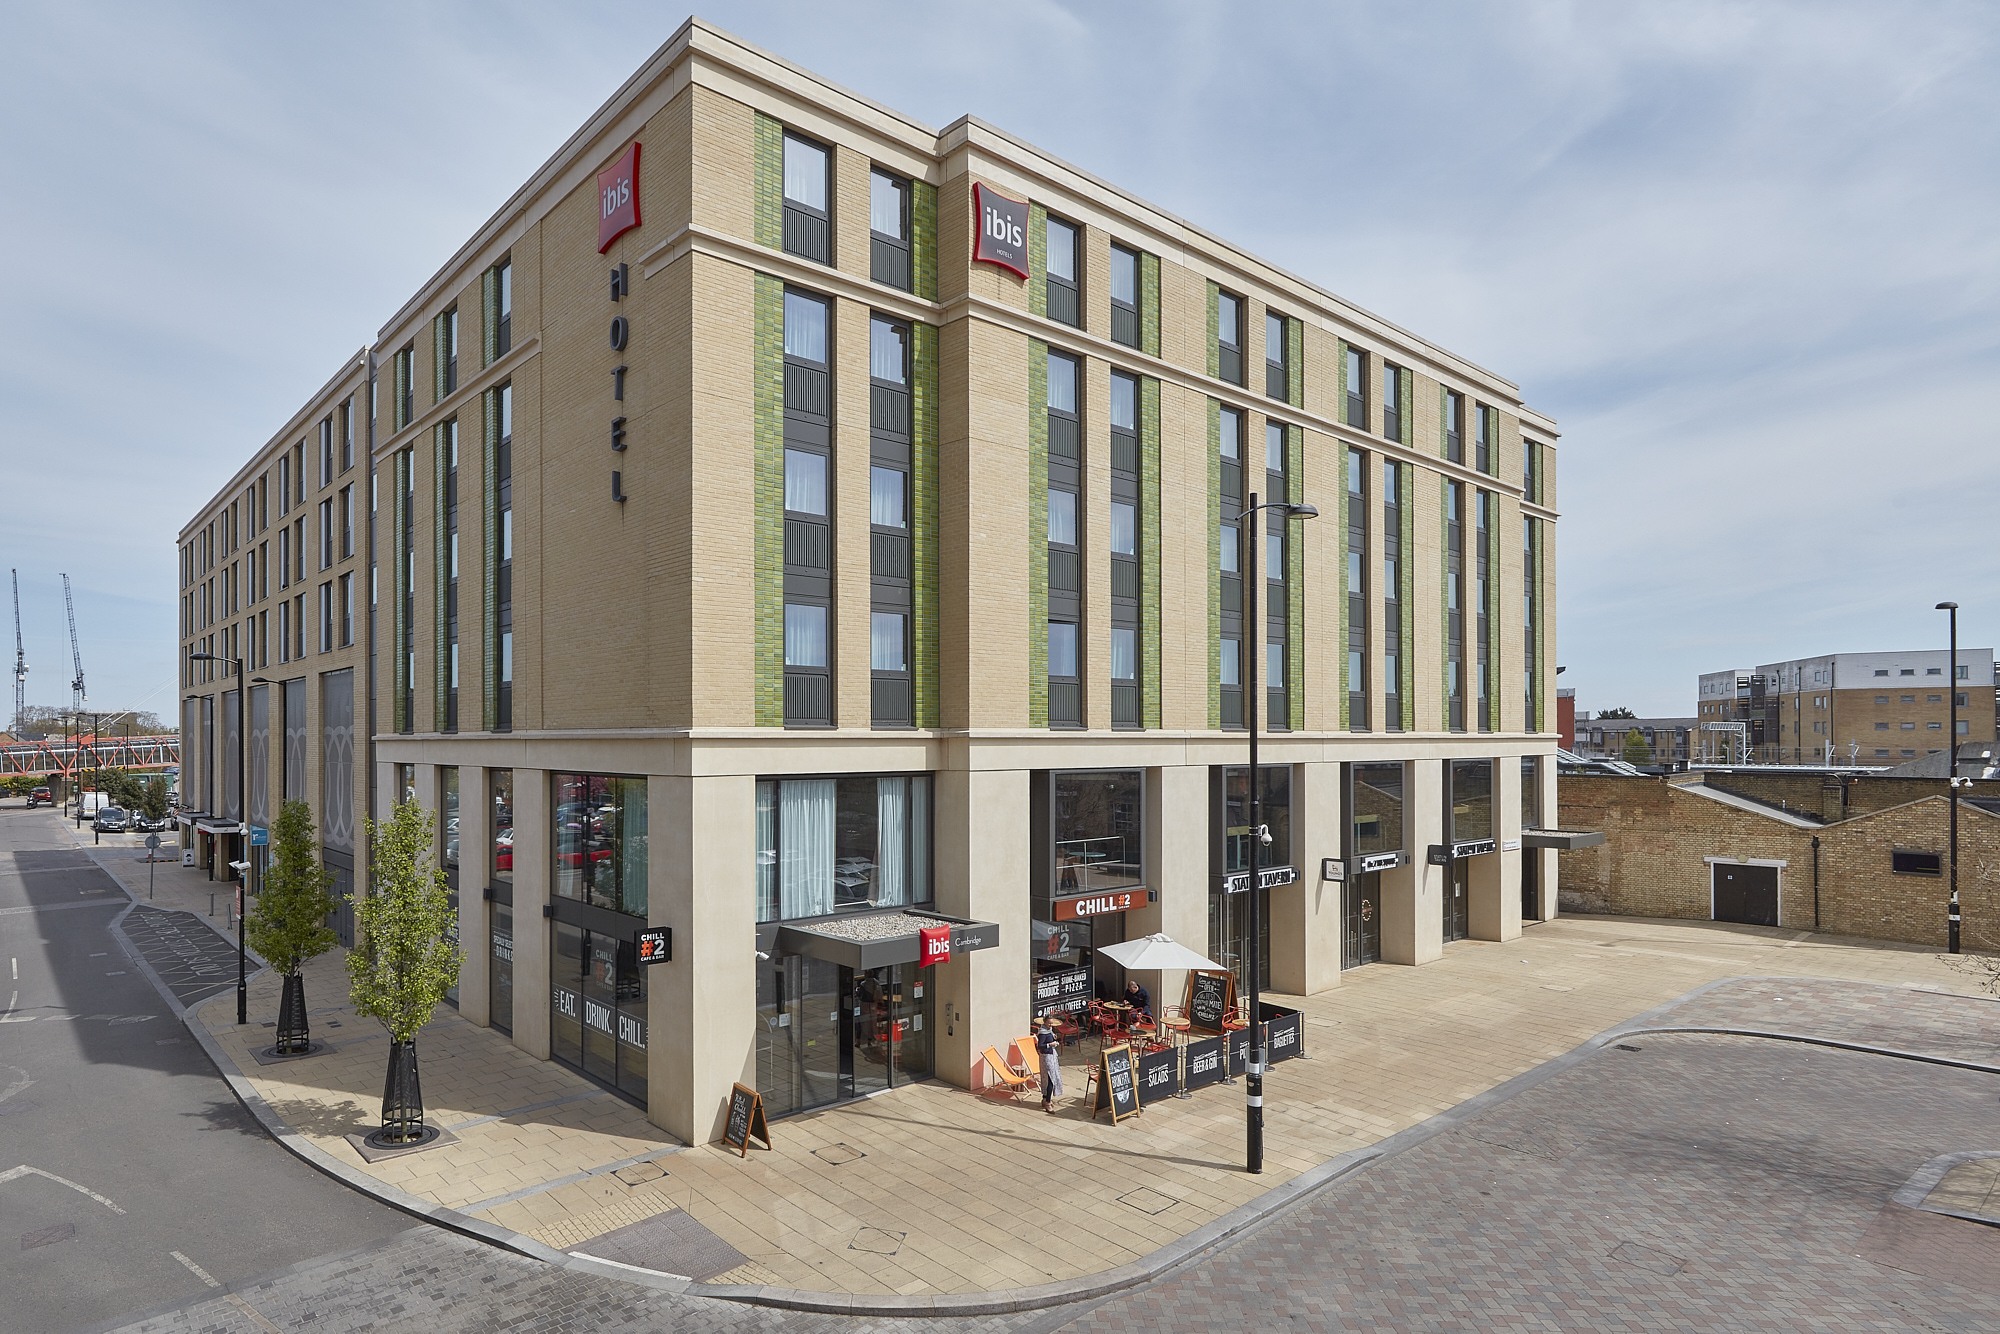 Pre-let, development funding and forward sale of the hotel and surrounding retail and commercial space